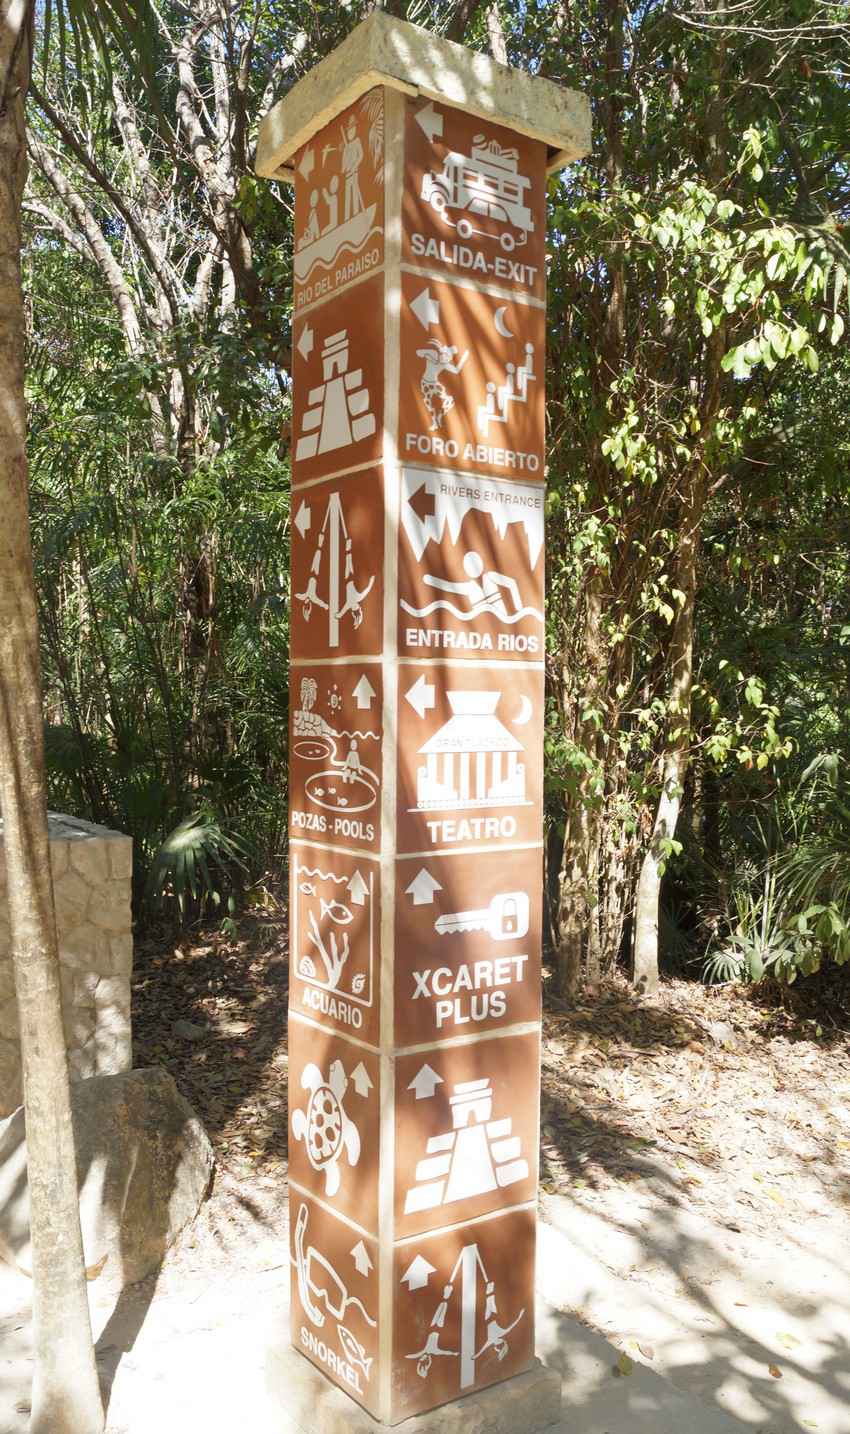 A large sign post in the Xcaret Park.